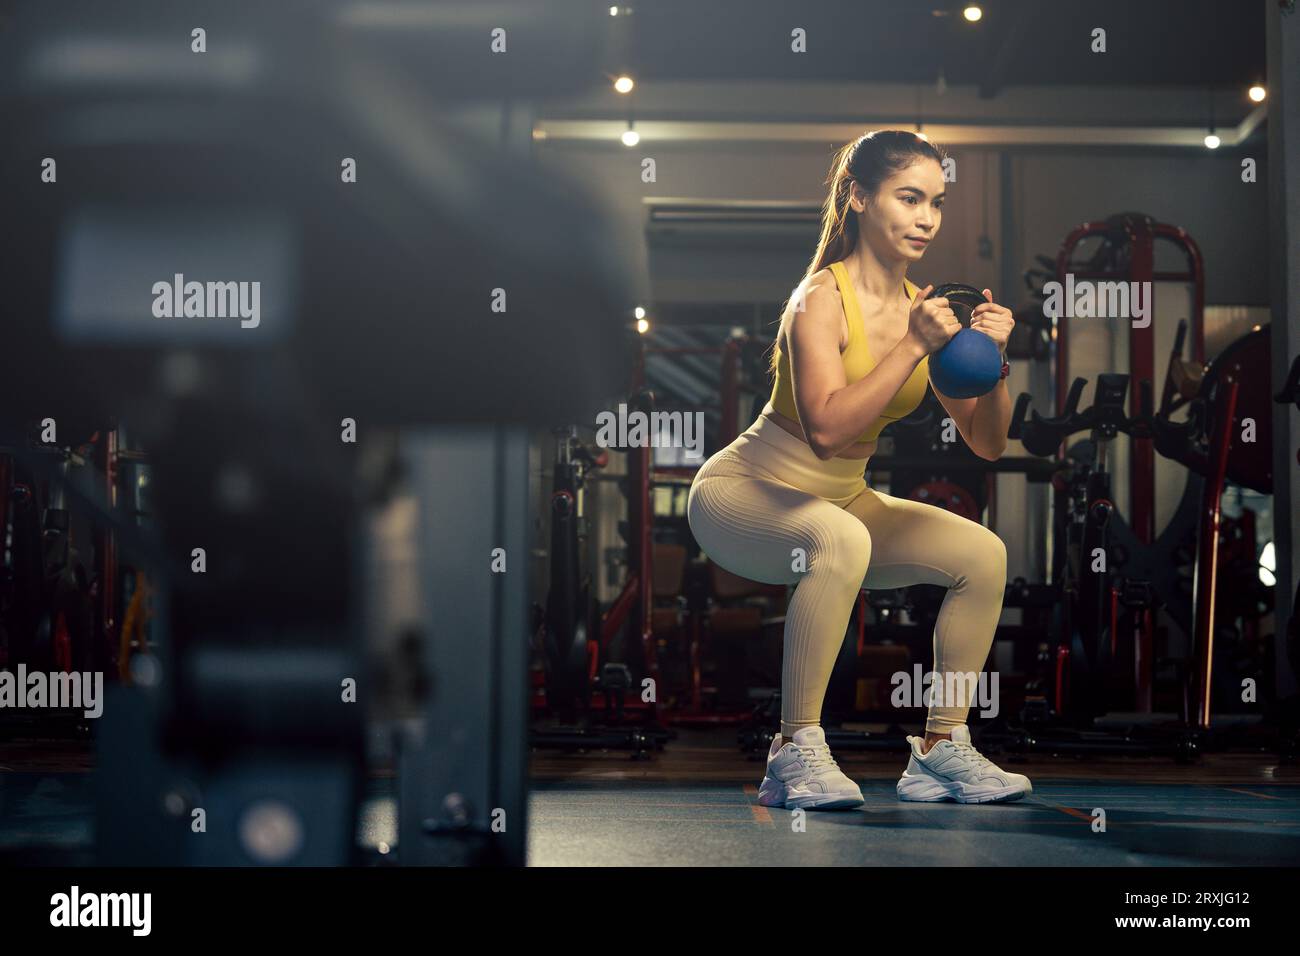 Young woman exercise workout at gym fitness training sport with kettlebell weight lifting. Stock Photo